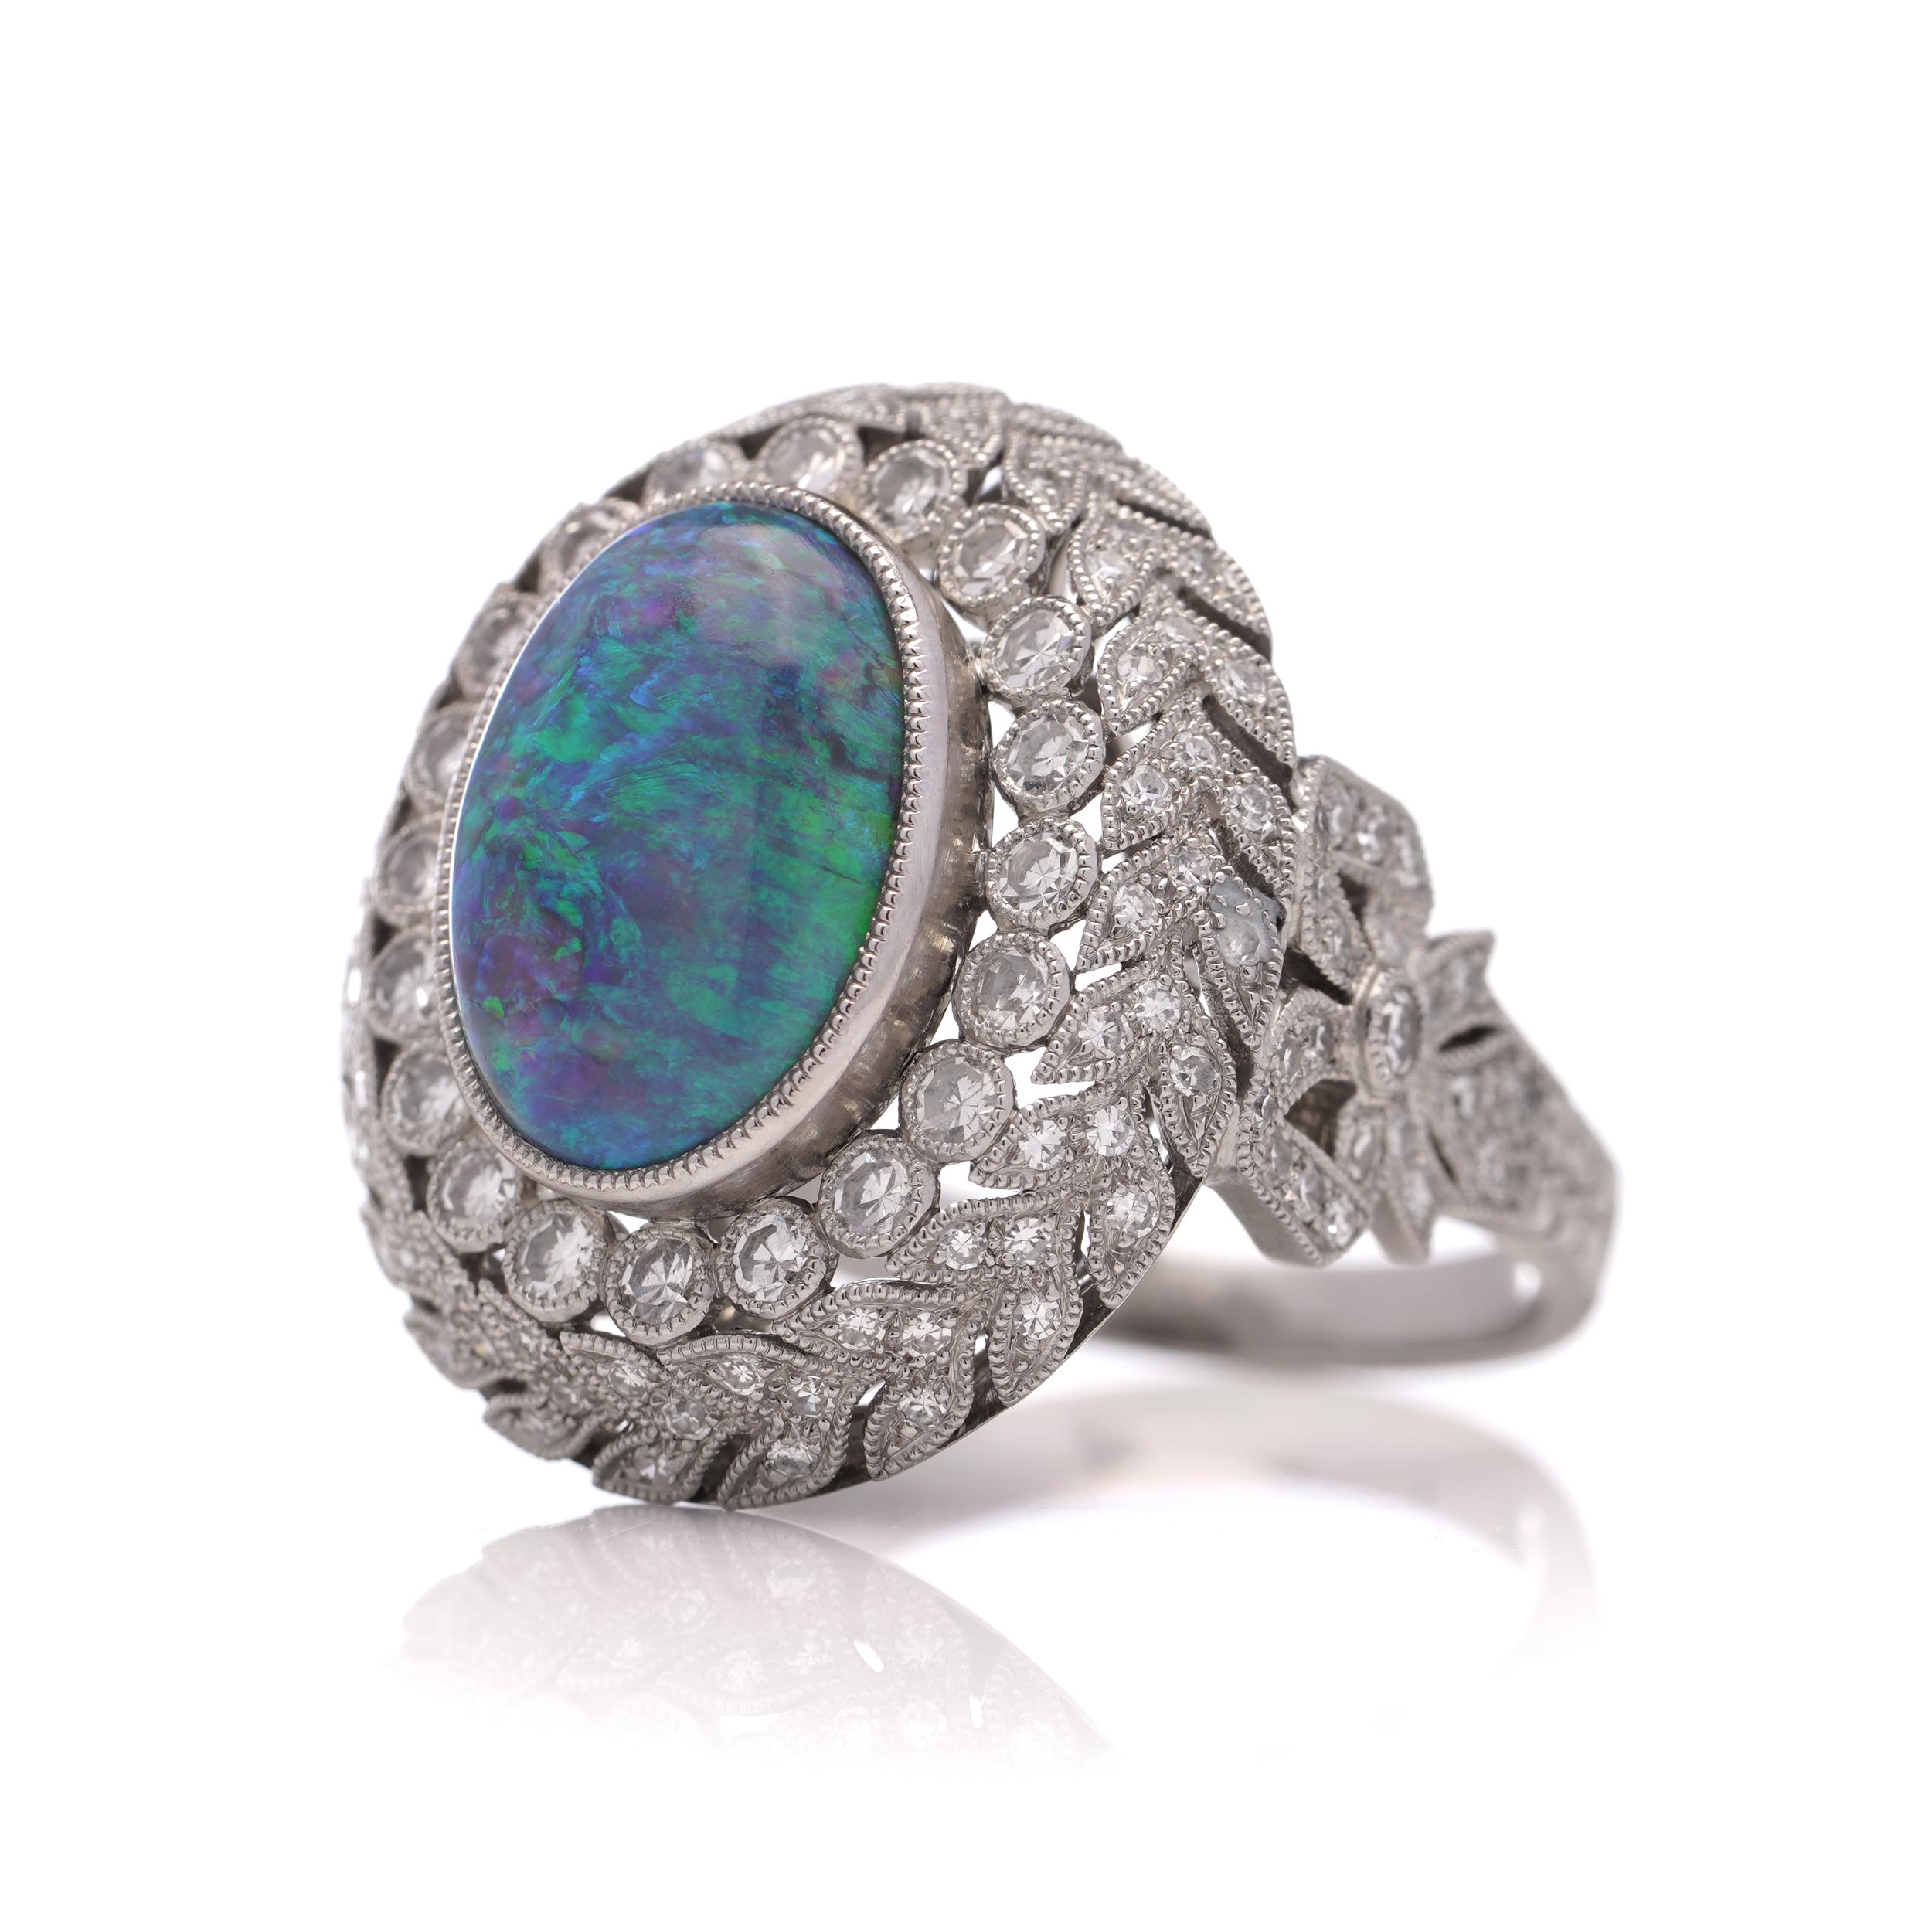 JoAq 850 Platinum 3.30 carats of Oval Opal cluster ring  For Sale 2